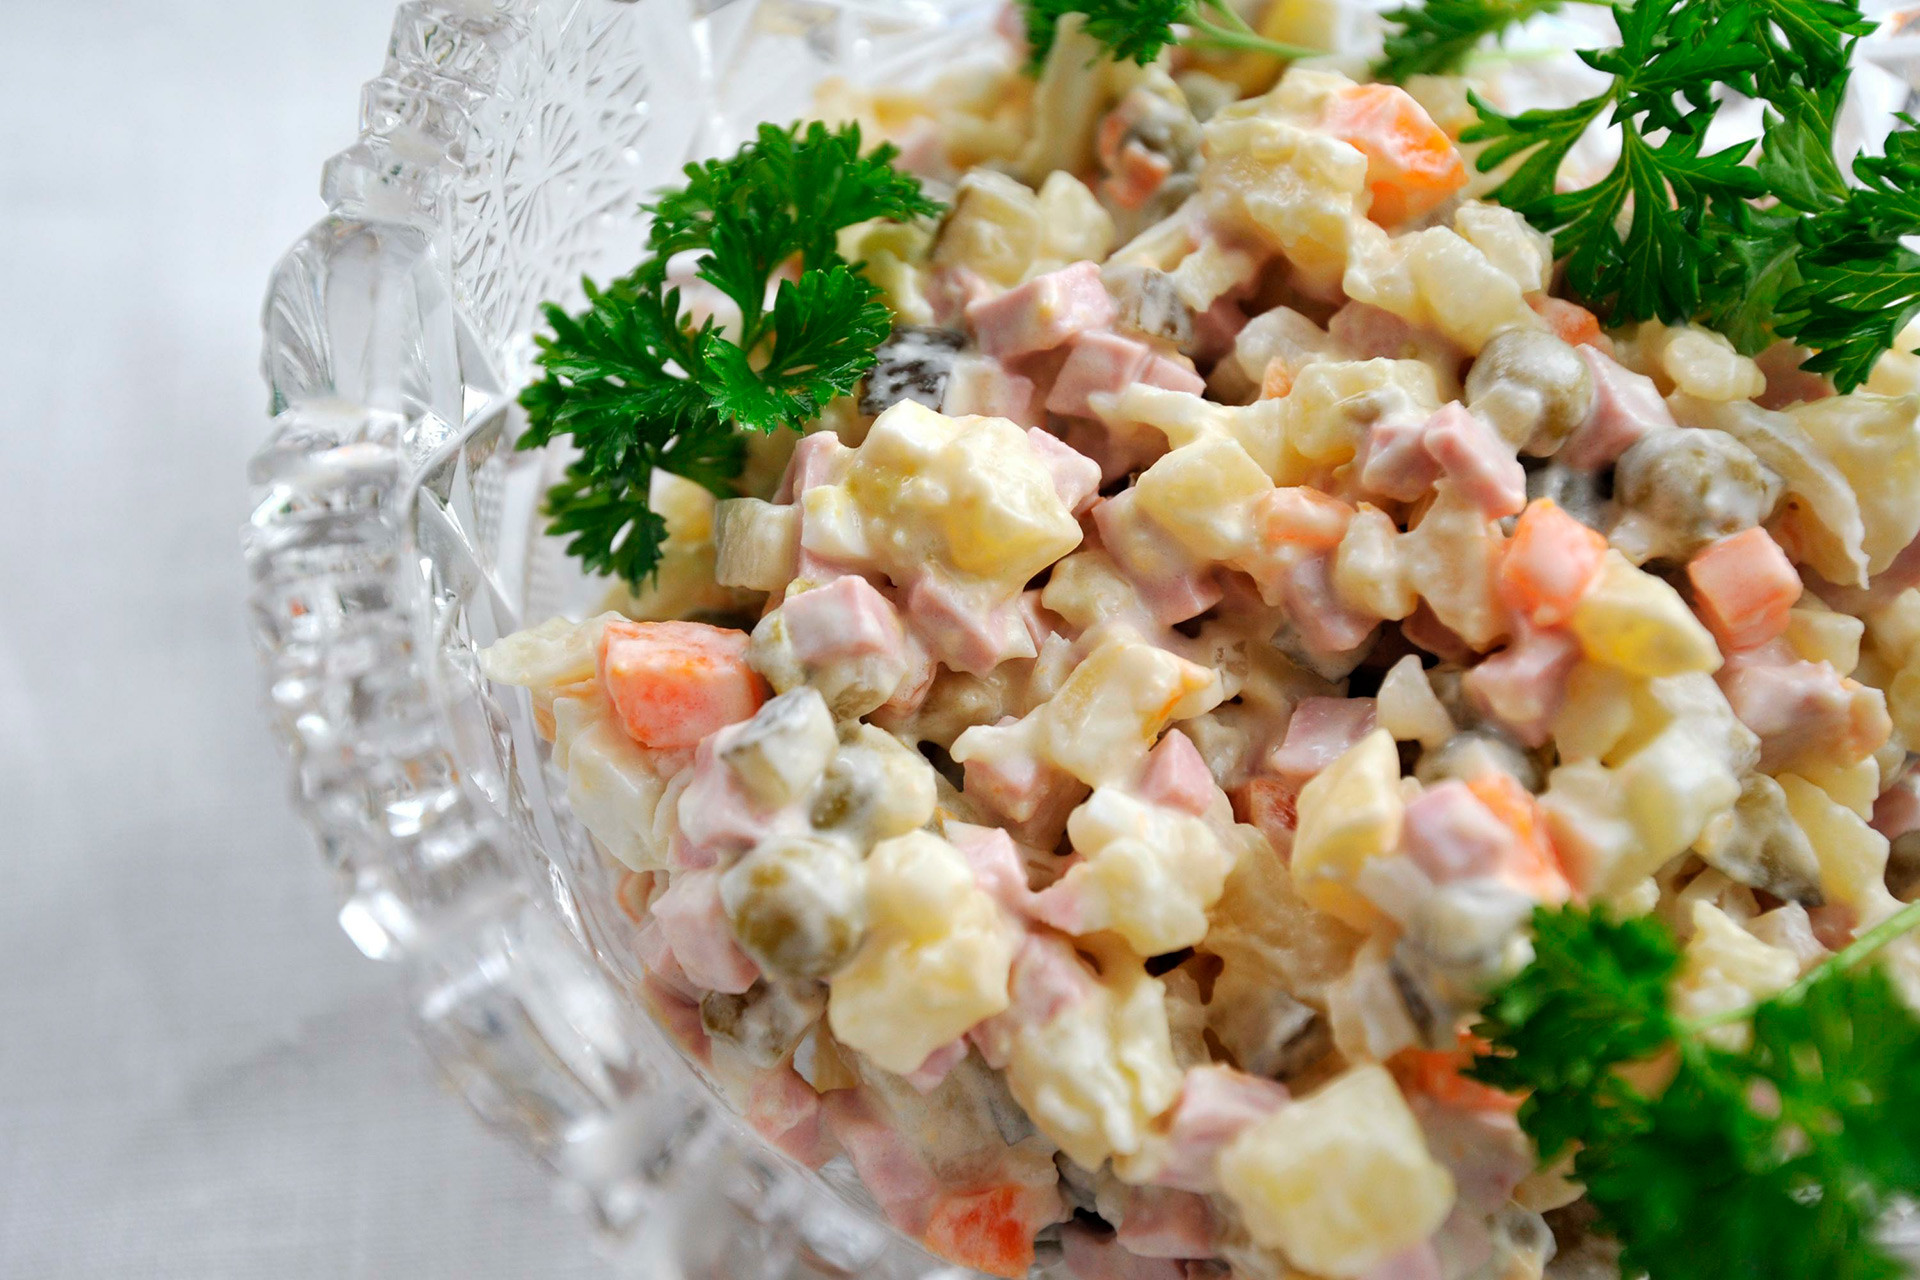 The Russian salad.